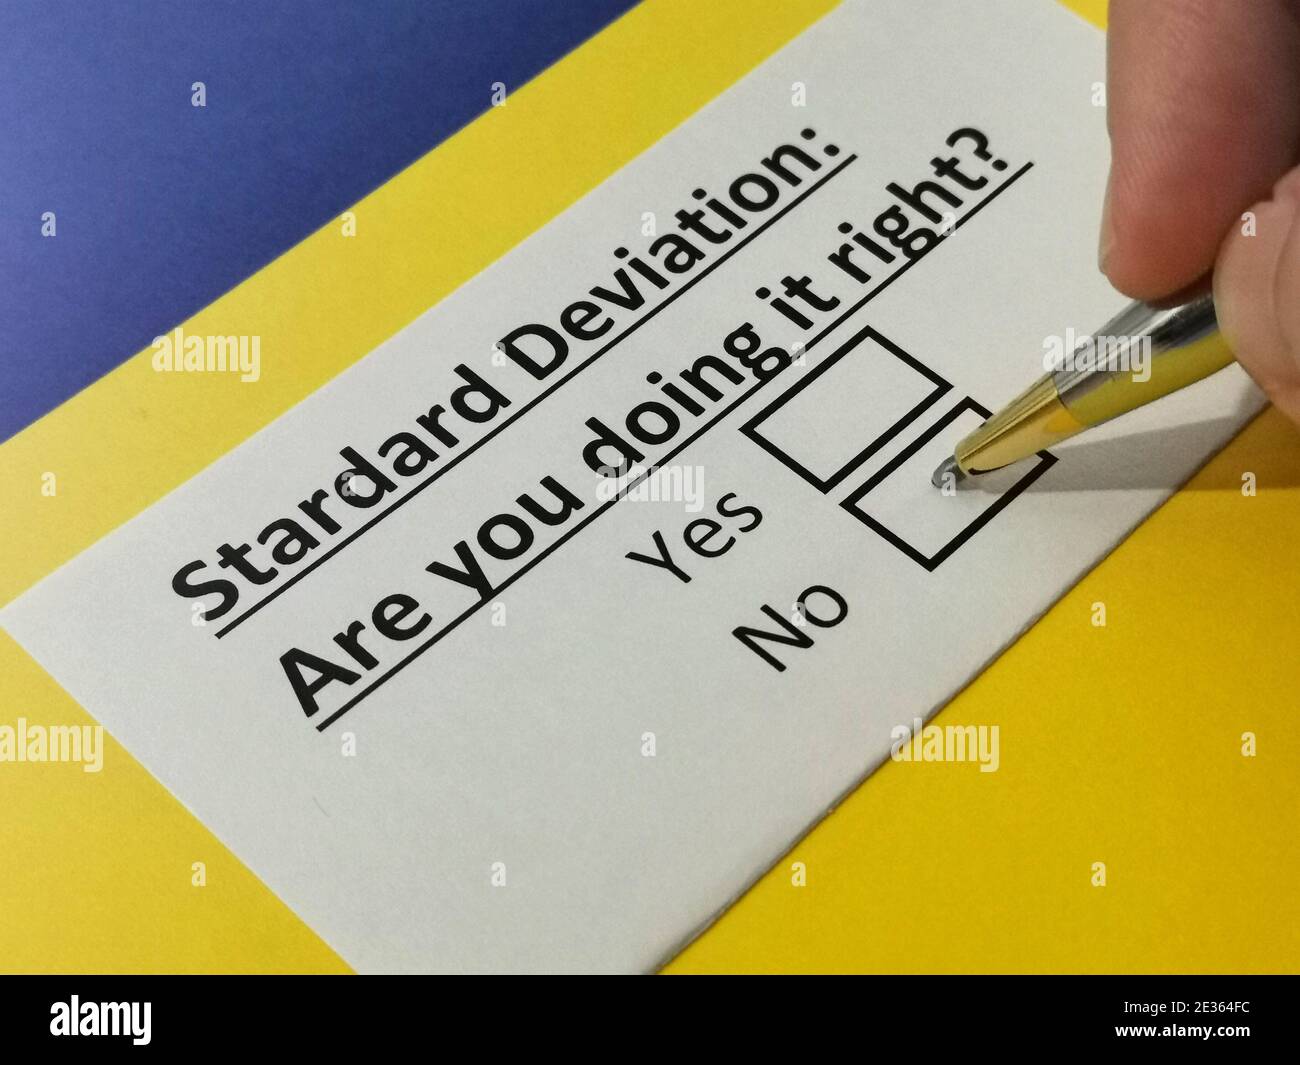 One person is answering question about standard deviation. Stock Photo